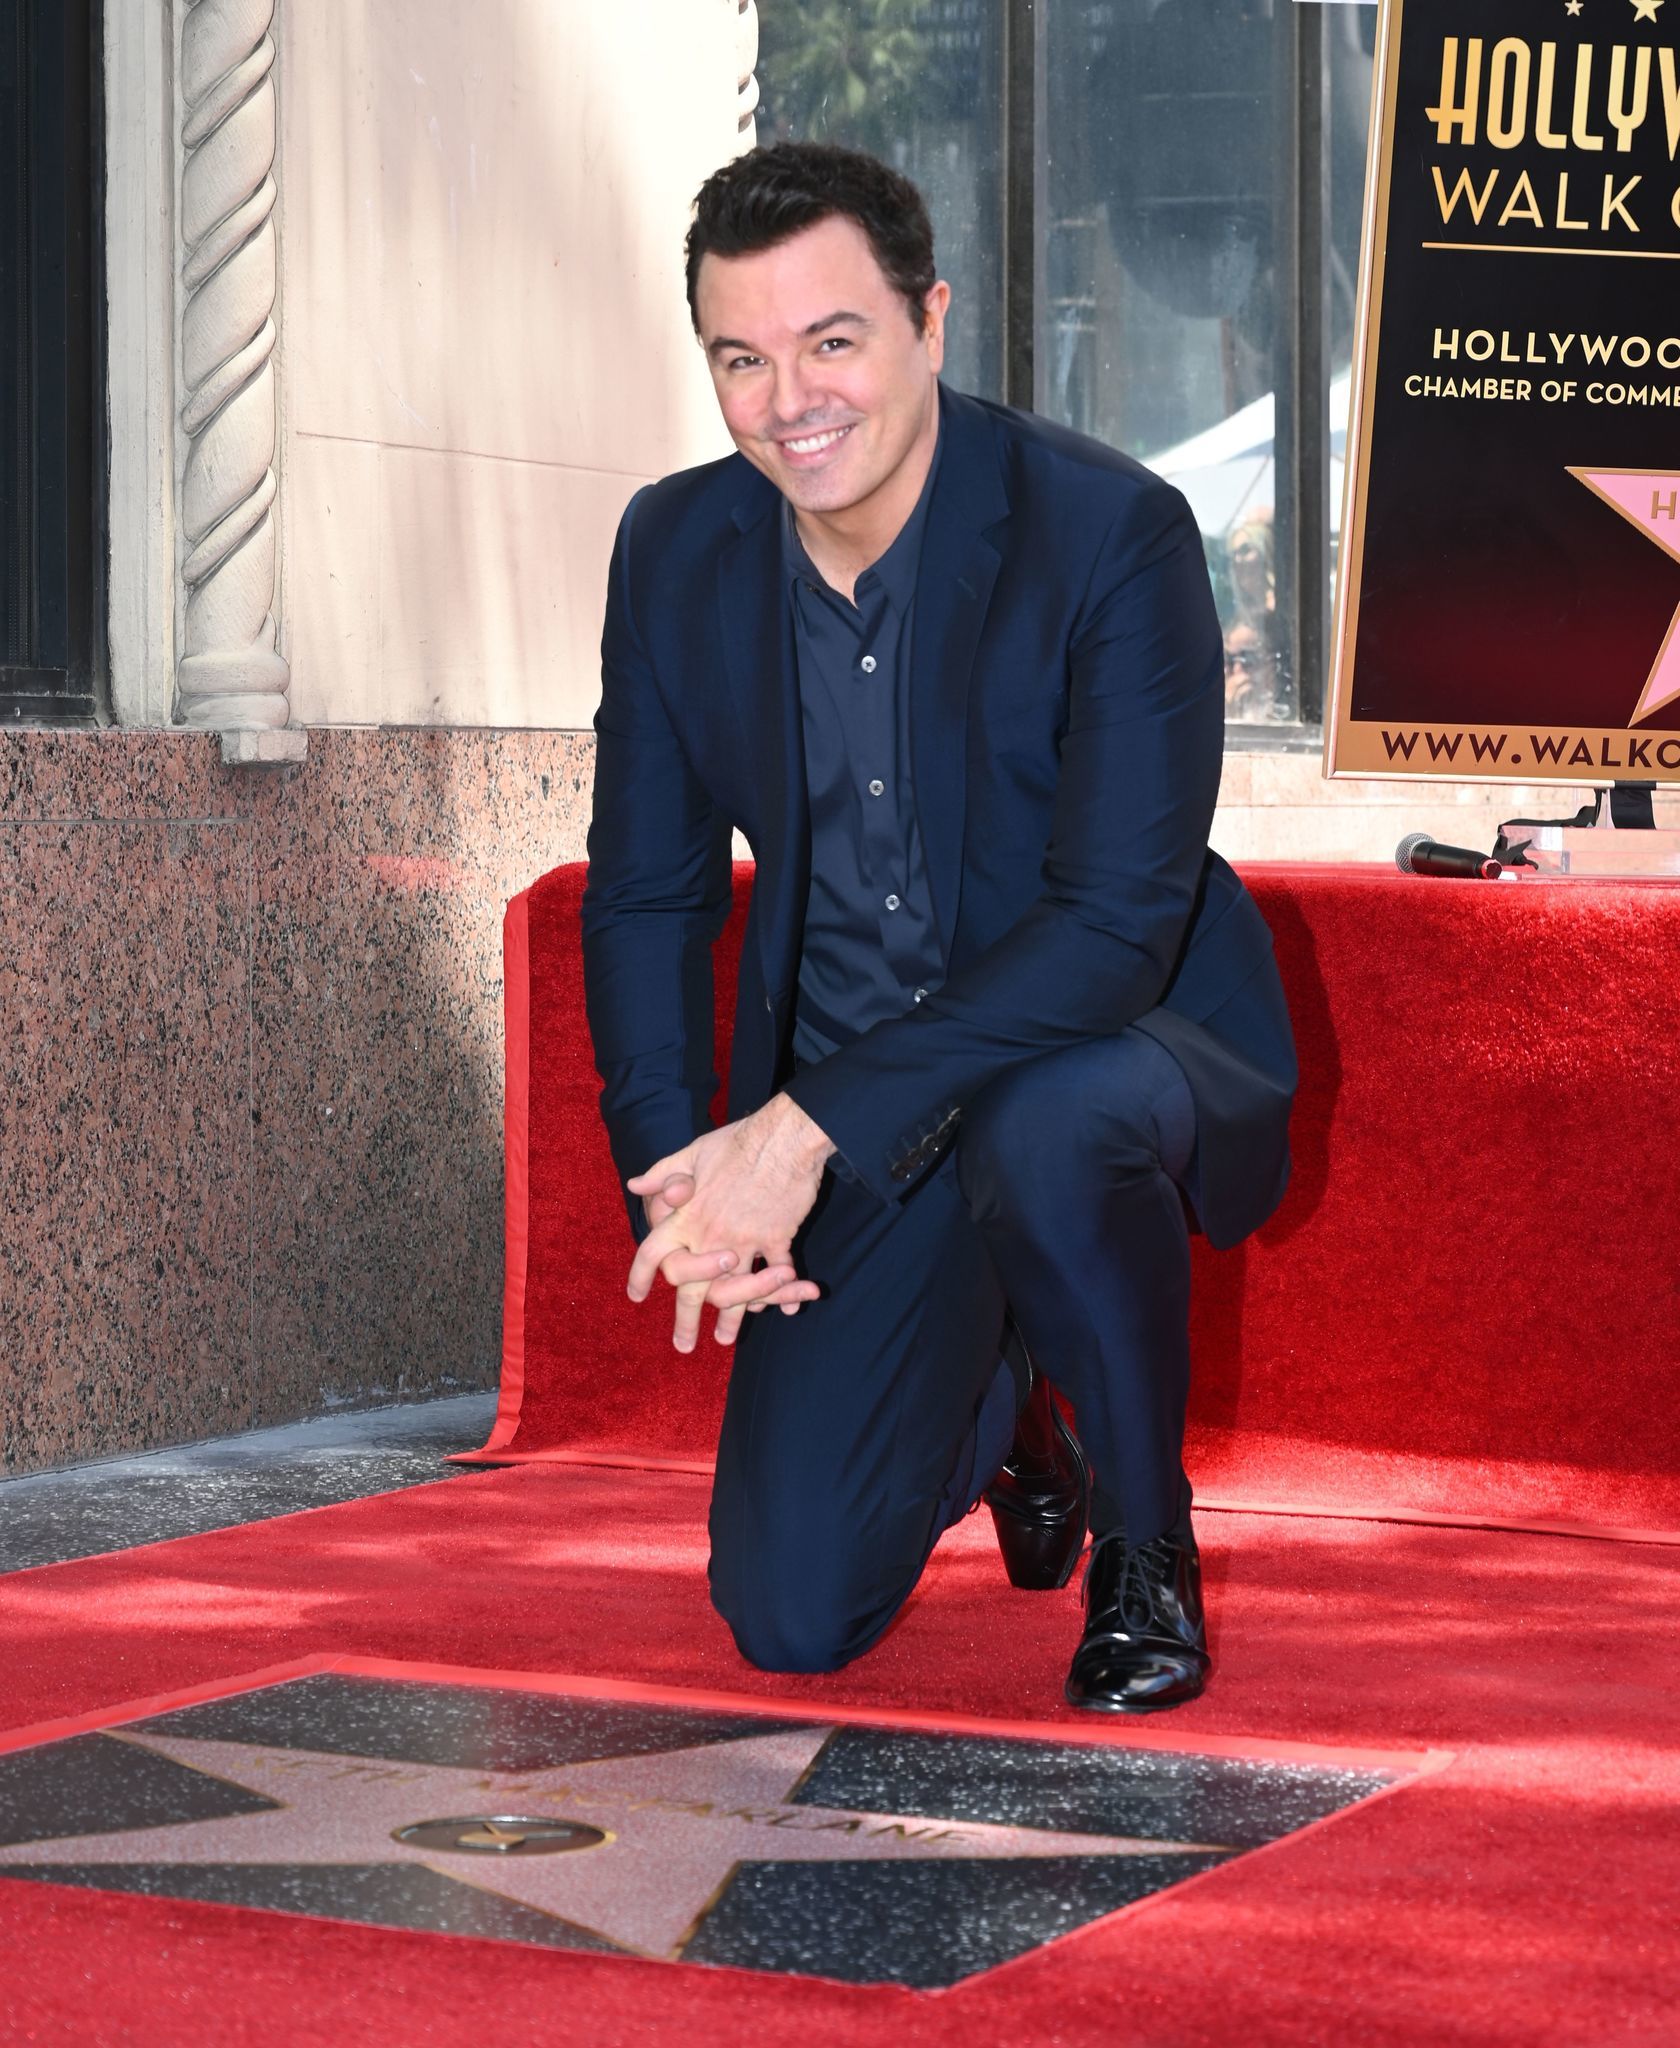 Seth MacFarlane couldn't hide his excitement during his Hollywood Walk of Fame ceremony in Hollywood, Calif. on April 23, 2019. The 